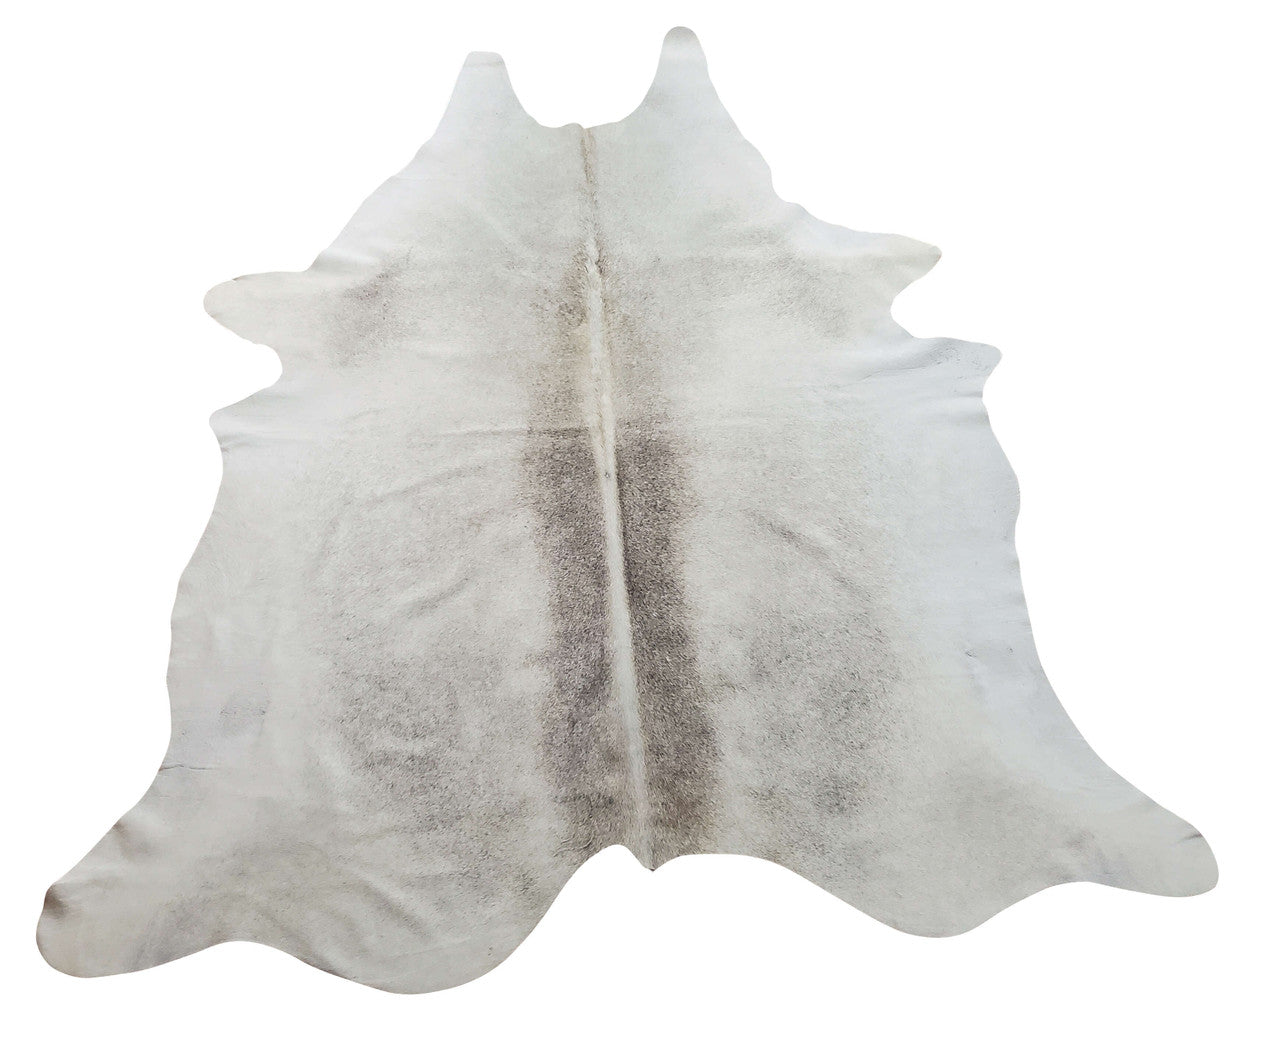 This real cowhide rug is beautiful and exactly as shown in the pictures and description. Fast shipping, large size, and perfect for any bedroom or living room.
